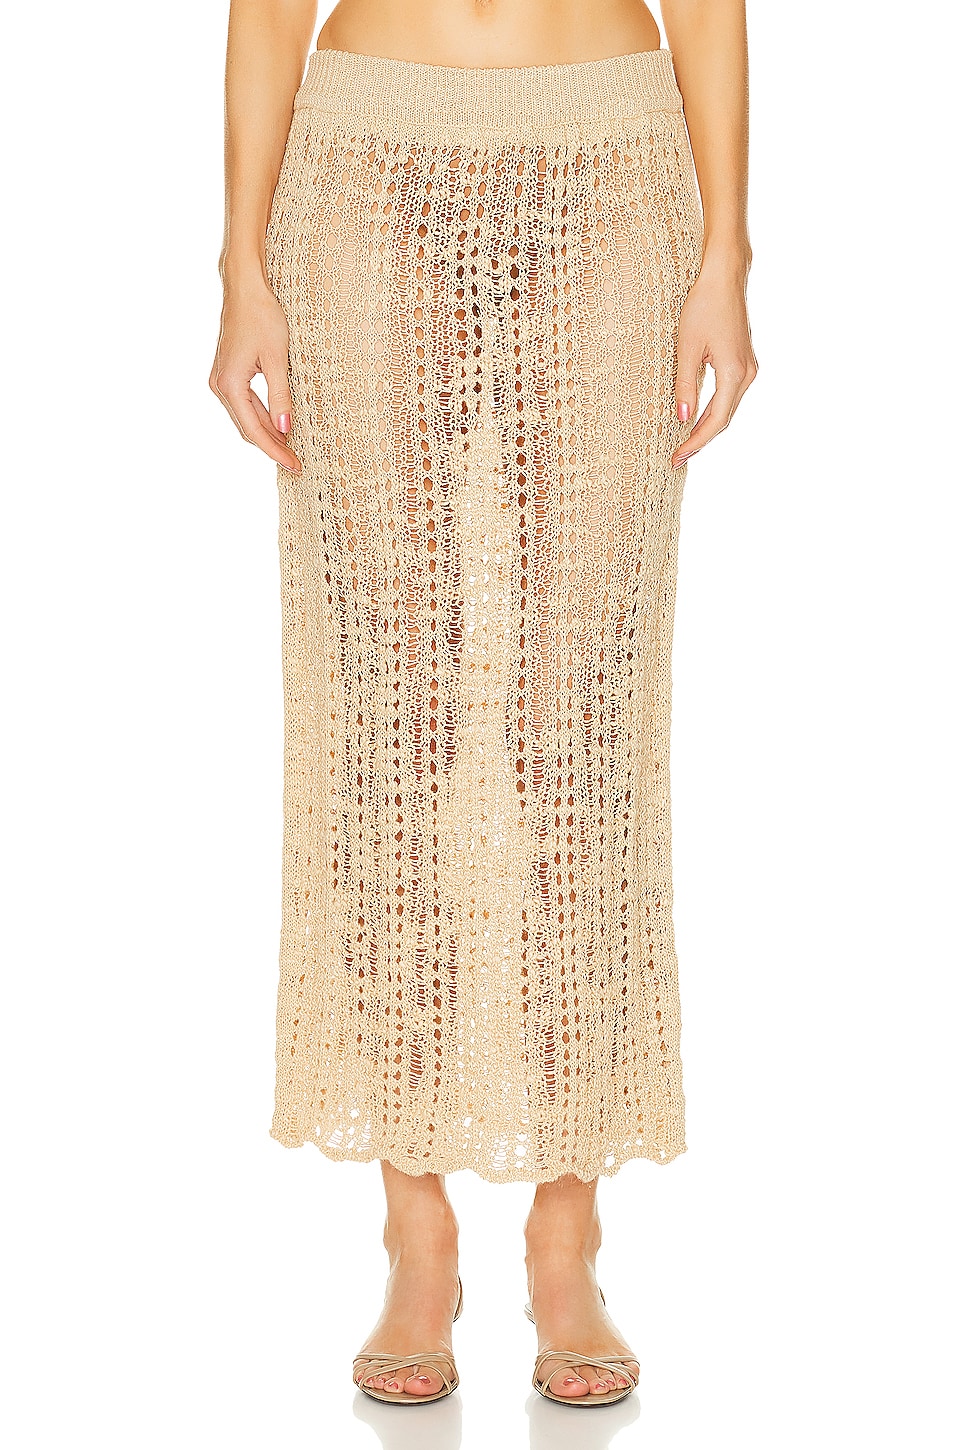 Image 1 of Cult Gaia Dawson Crochet Coverup Skirt in Champagne